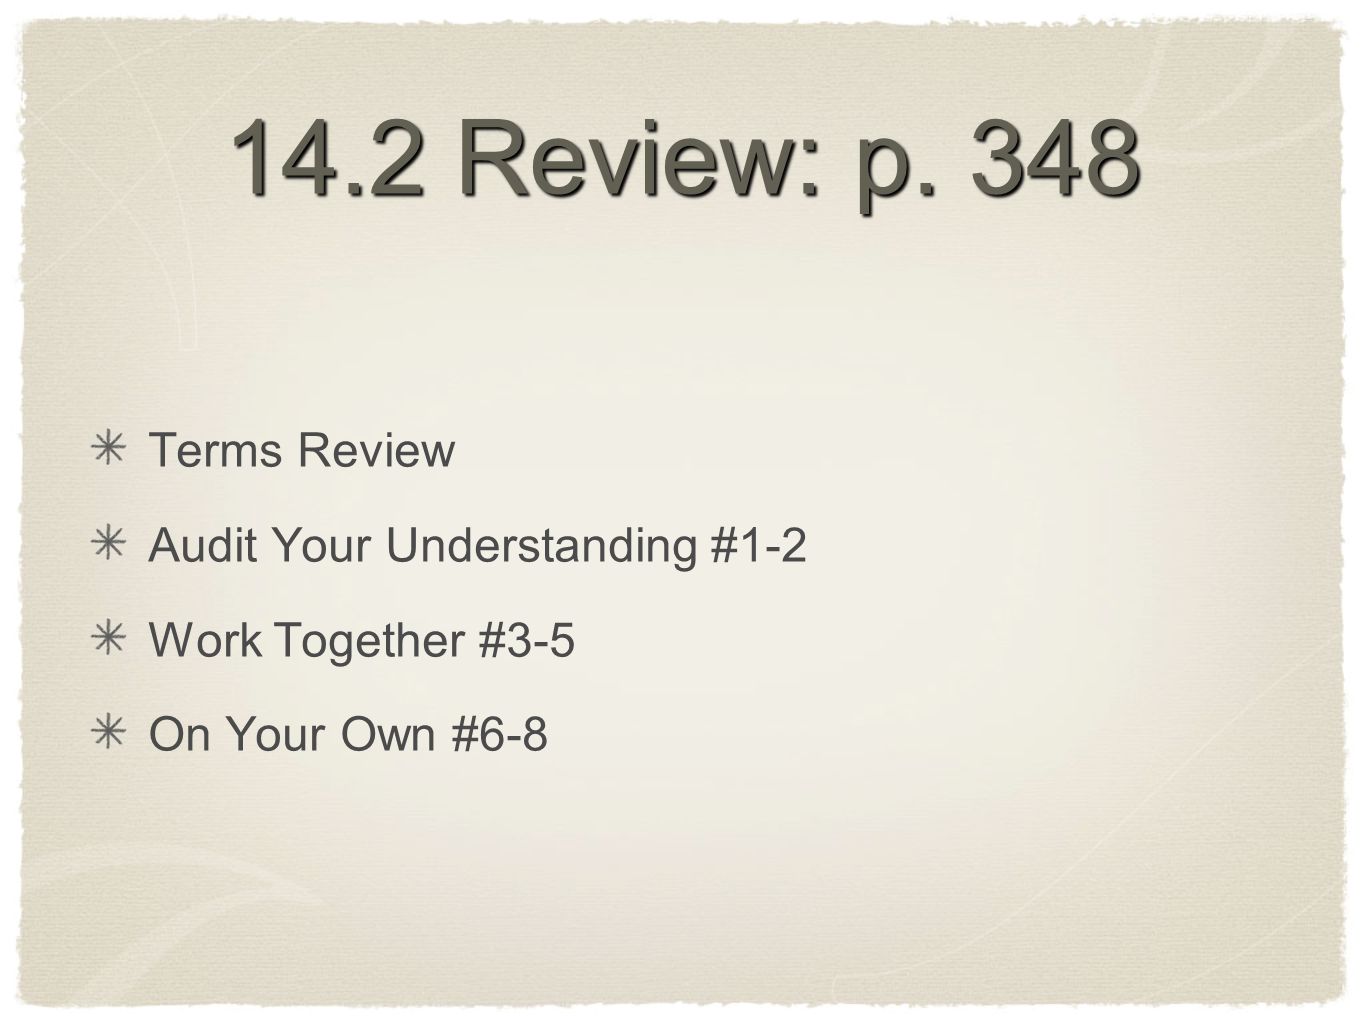 14.2 Review: p. 348 Terms Review Audit Your Understanding #1-2